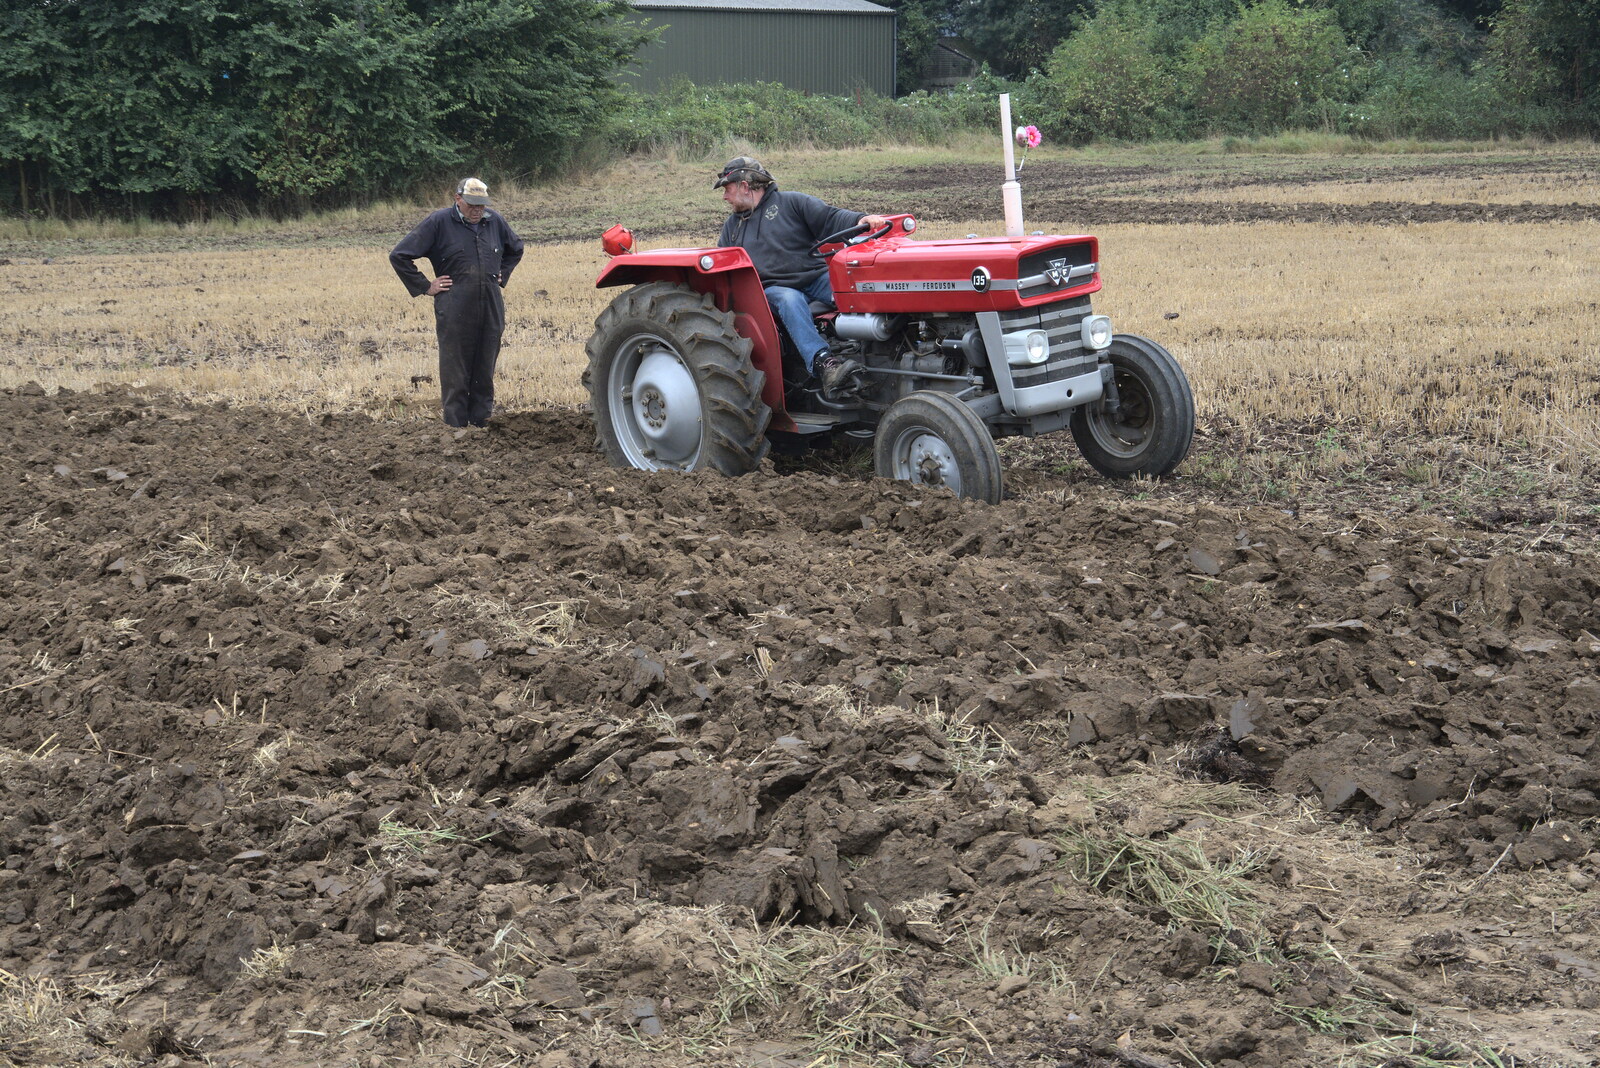 Vintage Tractor Ploughing, Thrandeston, Suffolk - 26th September 2021: There's more wheel spinning